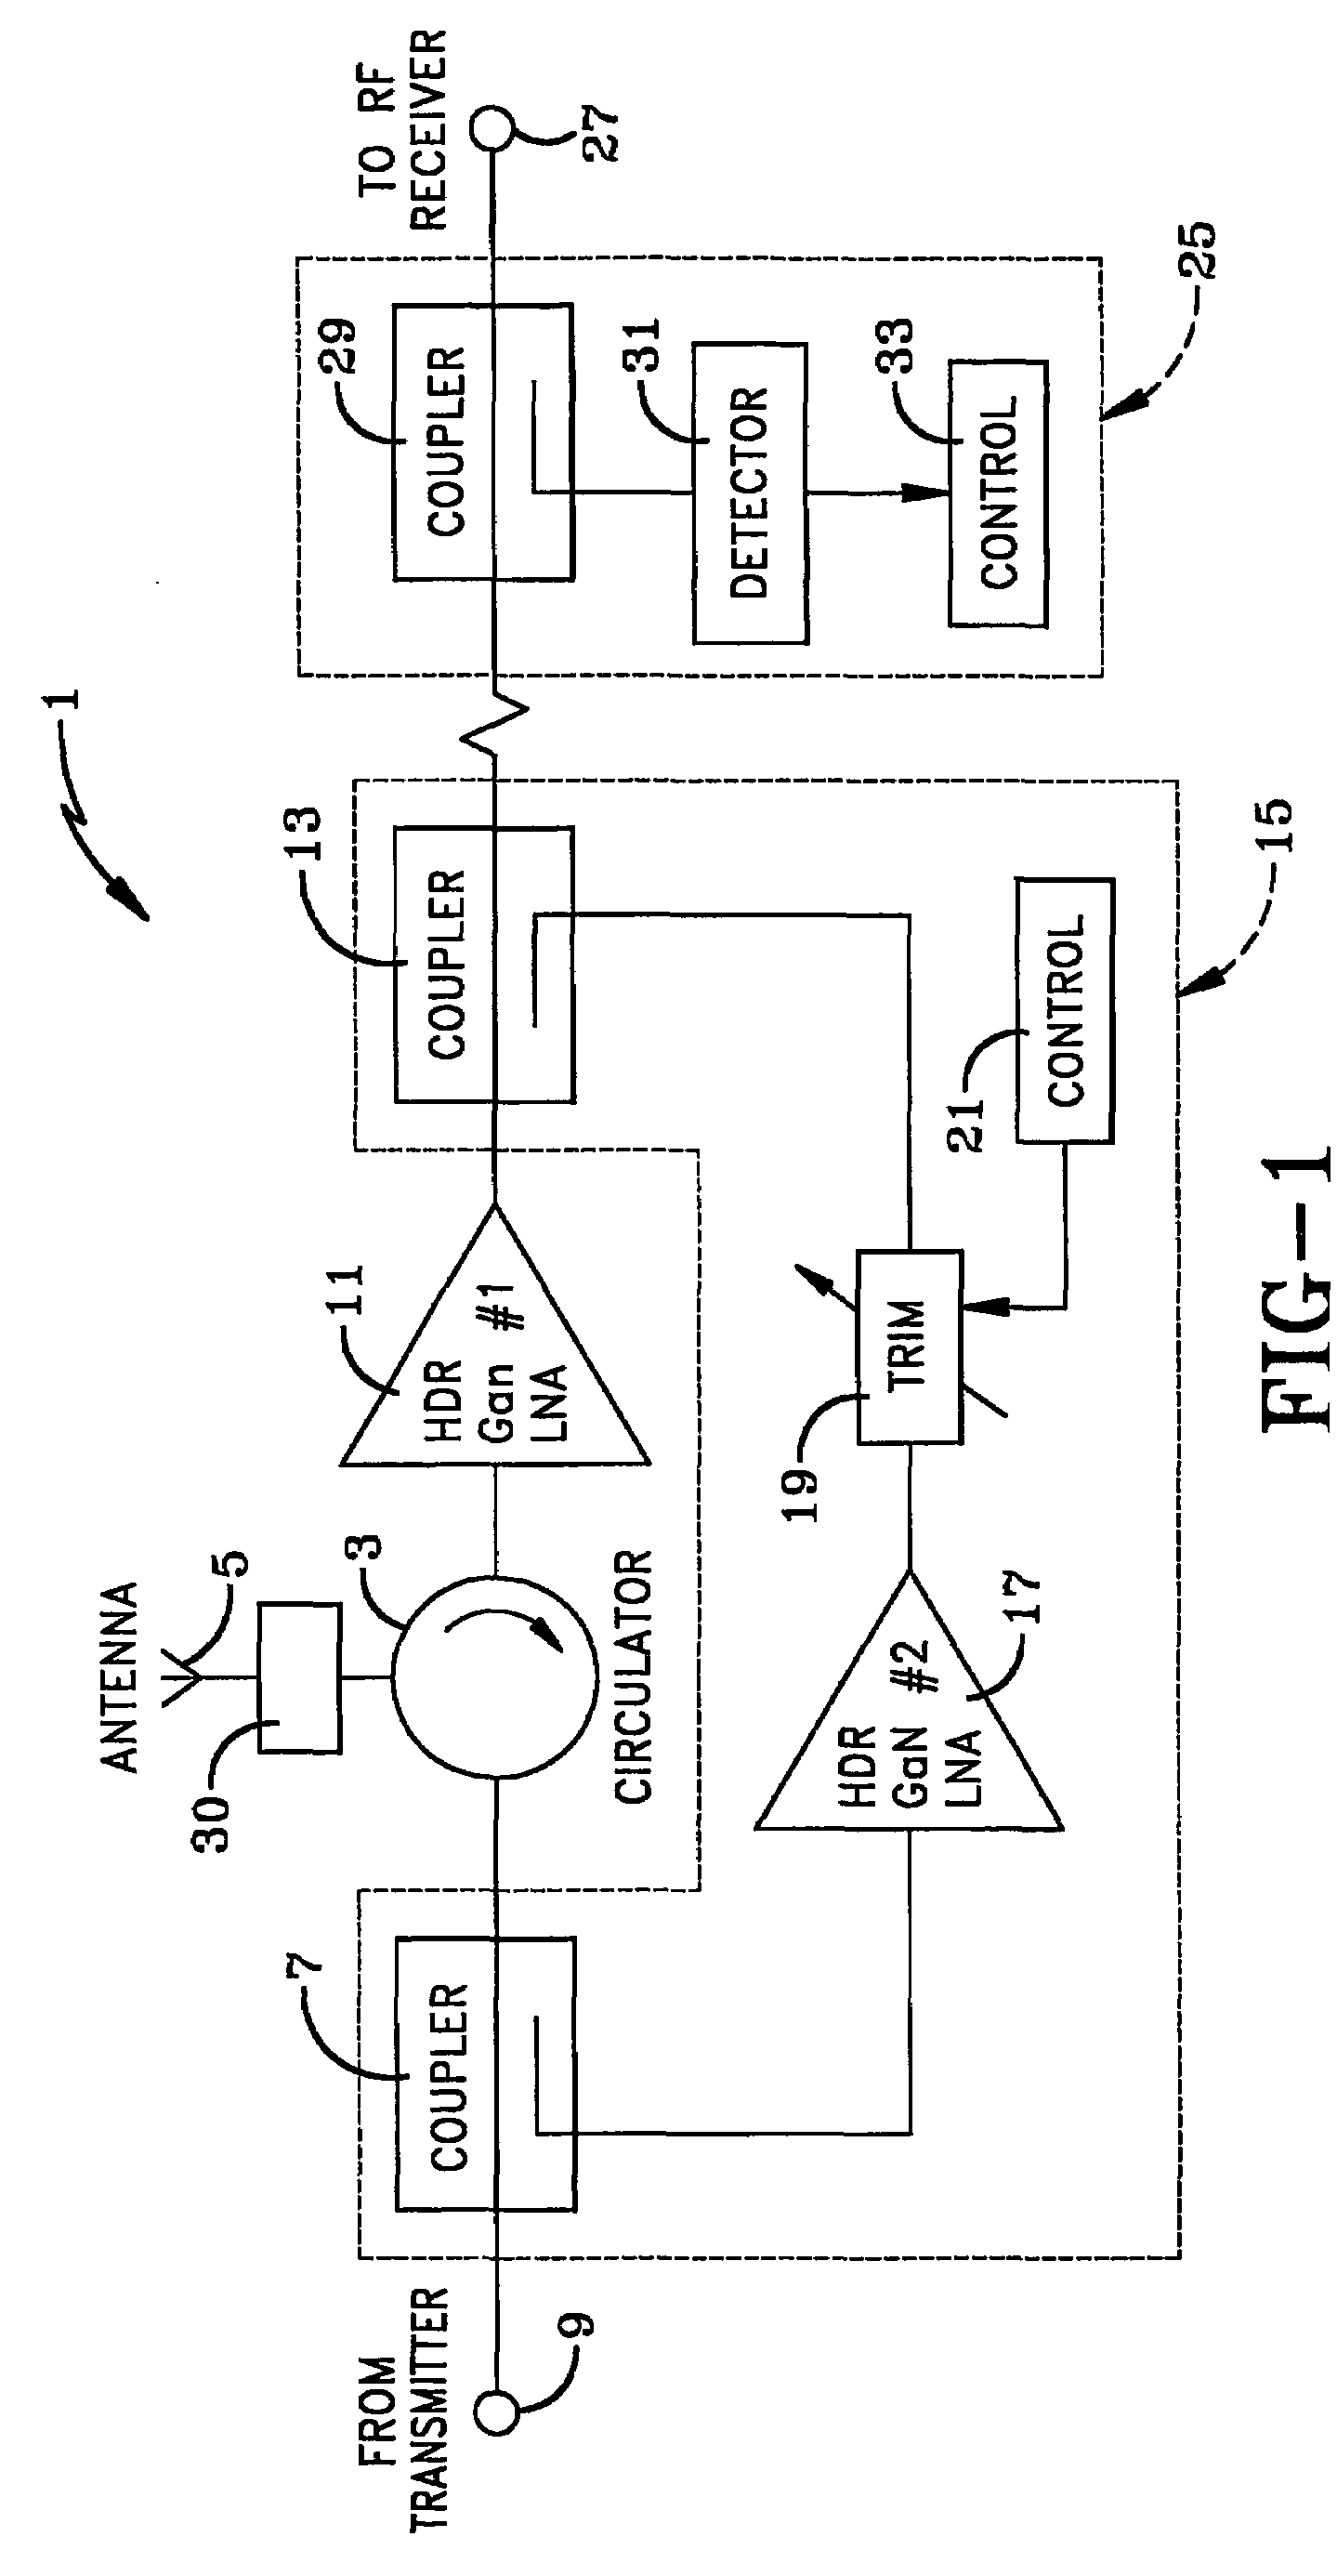 Duplexer for simultaneous transmit and receive radar systems